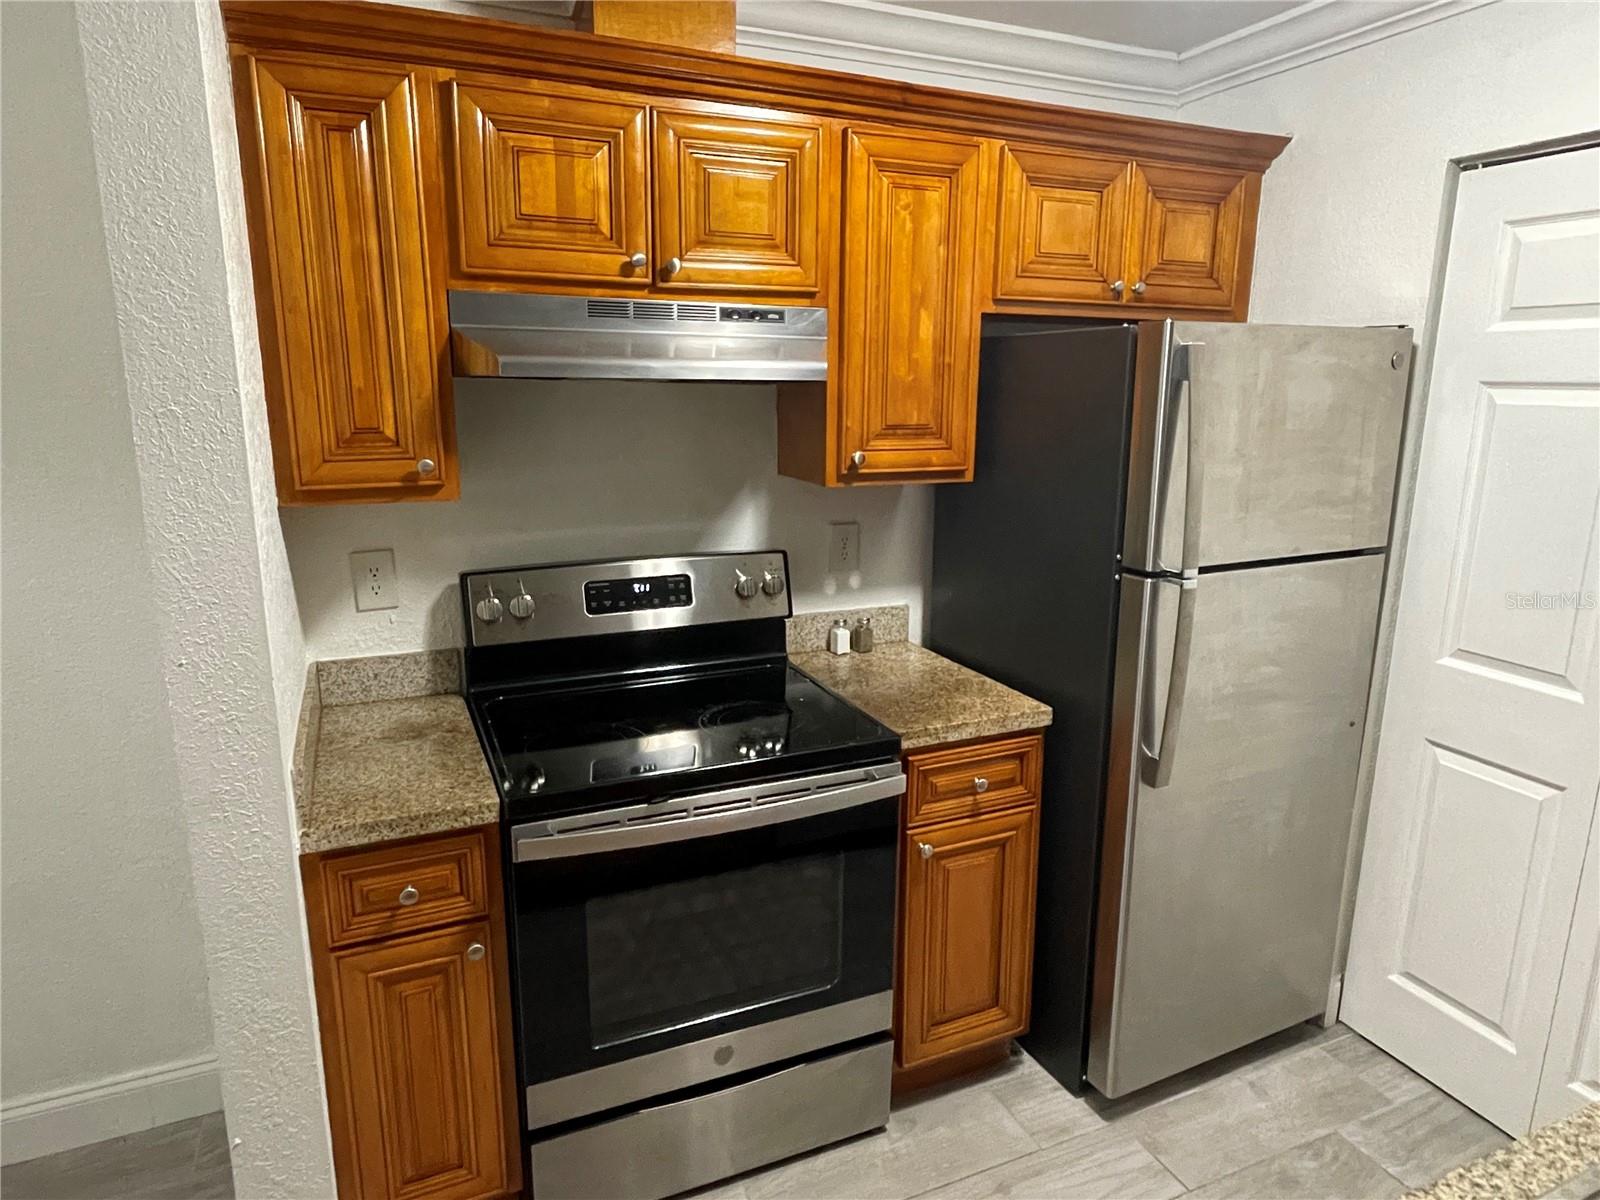 Glass top range, crown moulding, SS fridge, enhance the kitchen. Door on the right opens to laundry hookups.